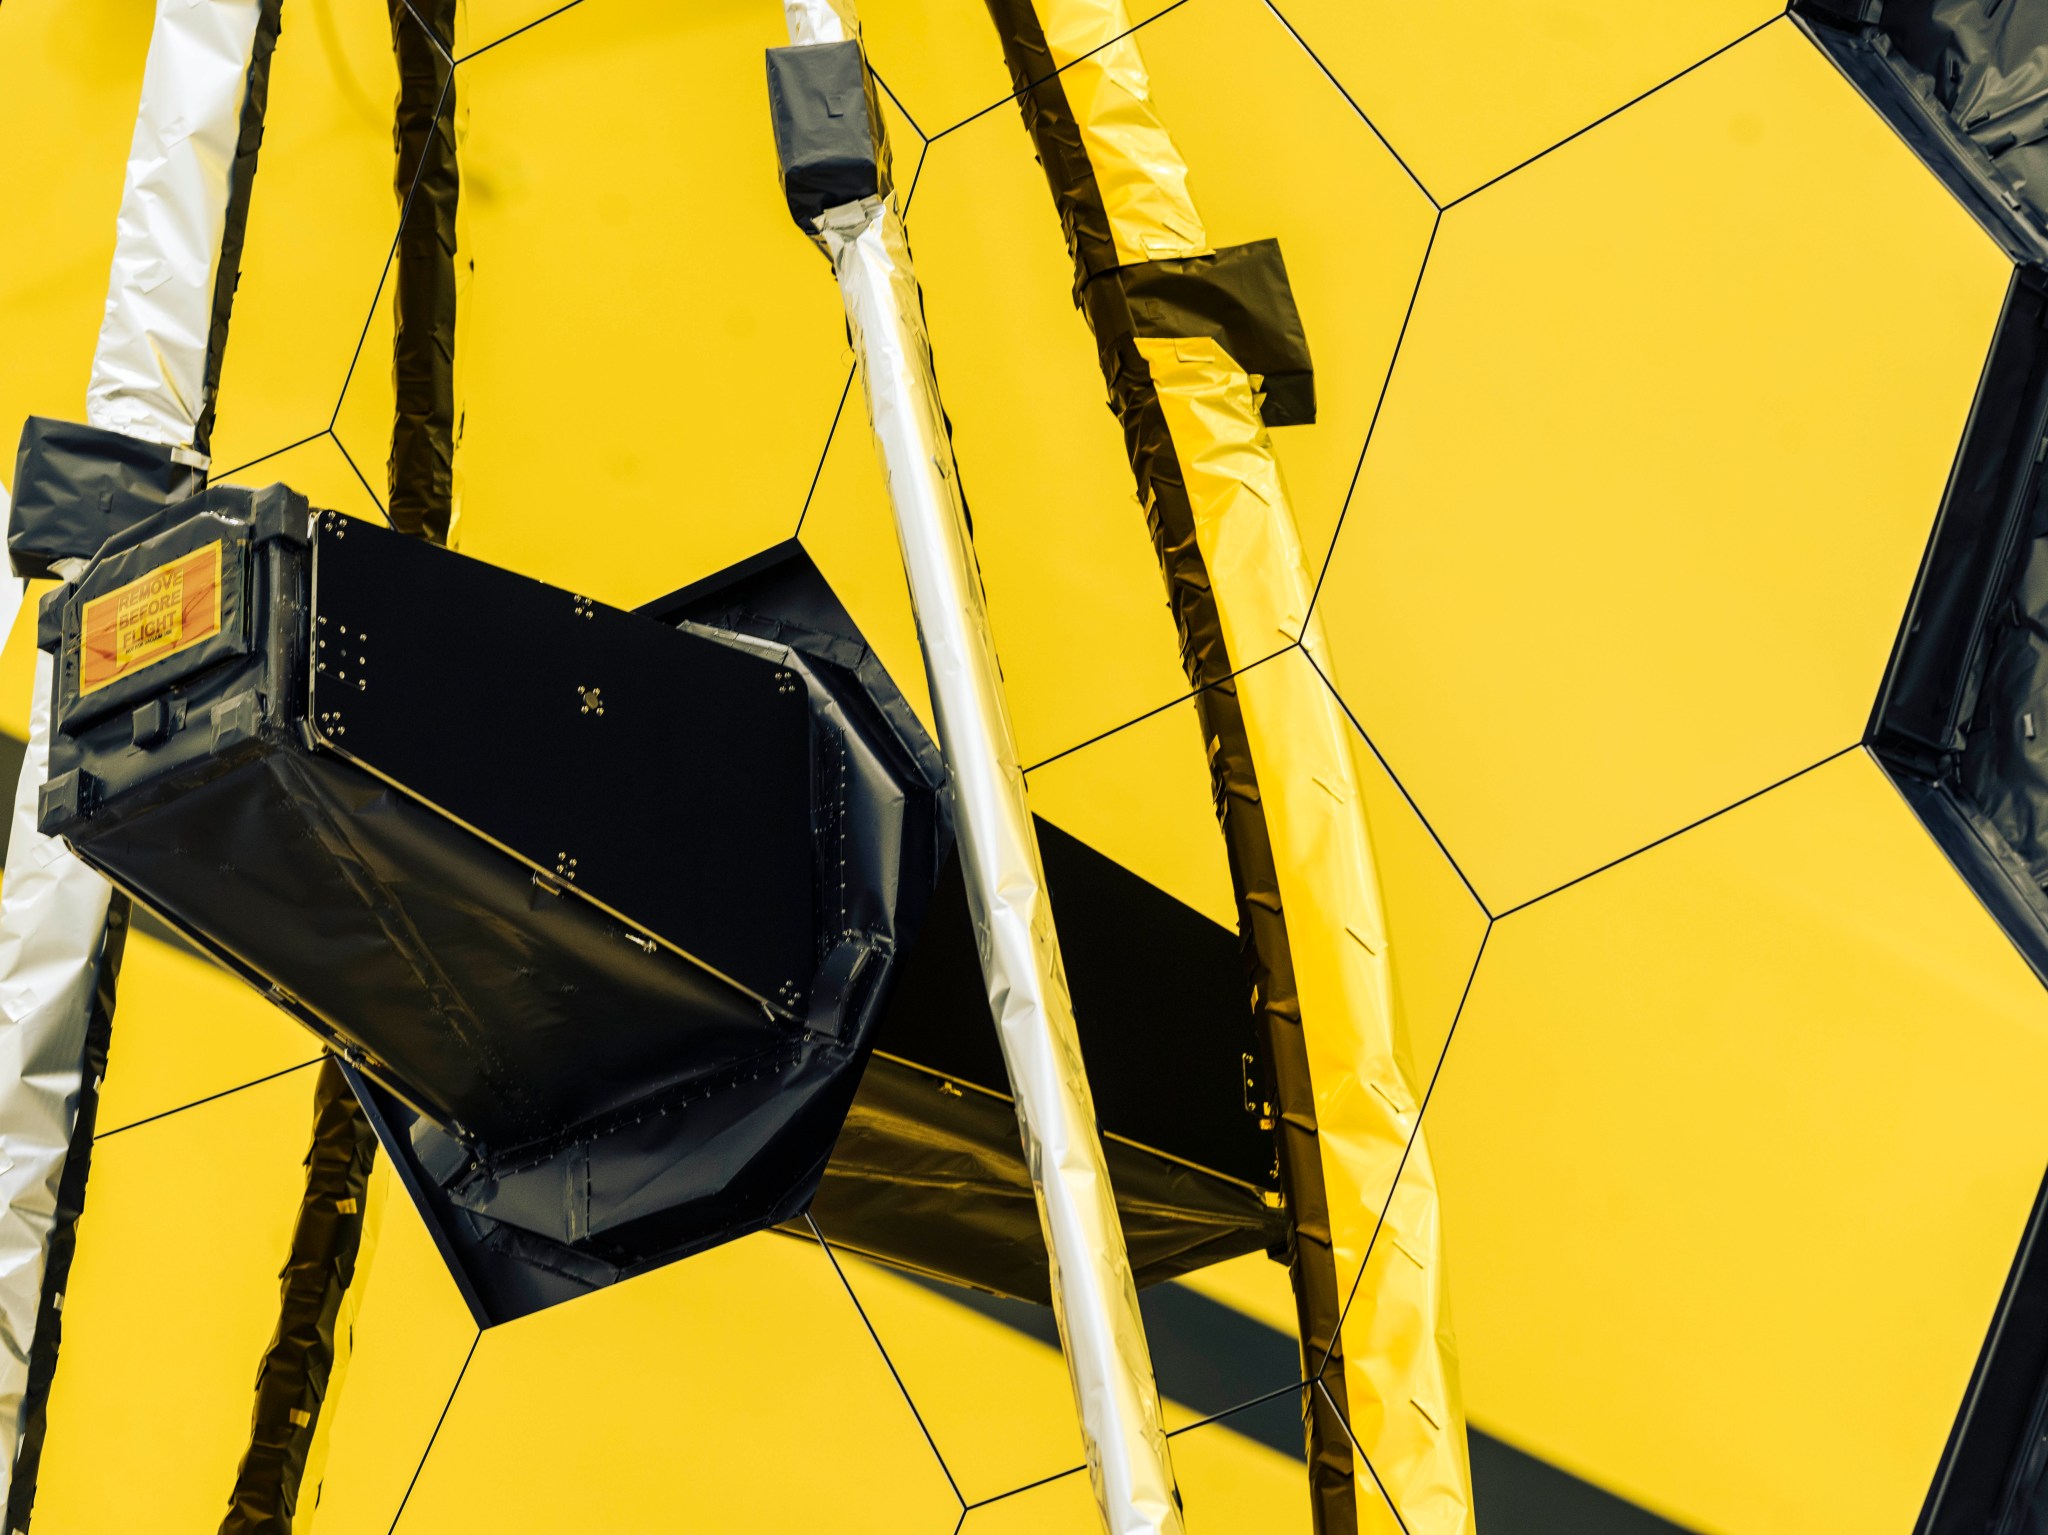 NASA’s James Webb Space Telescope is seen with one of its primary mirror wing panels fully extended during one of its final preflight tests.